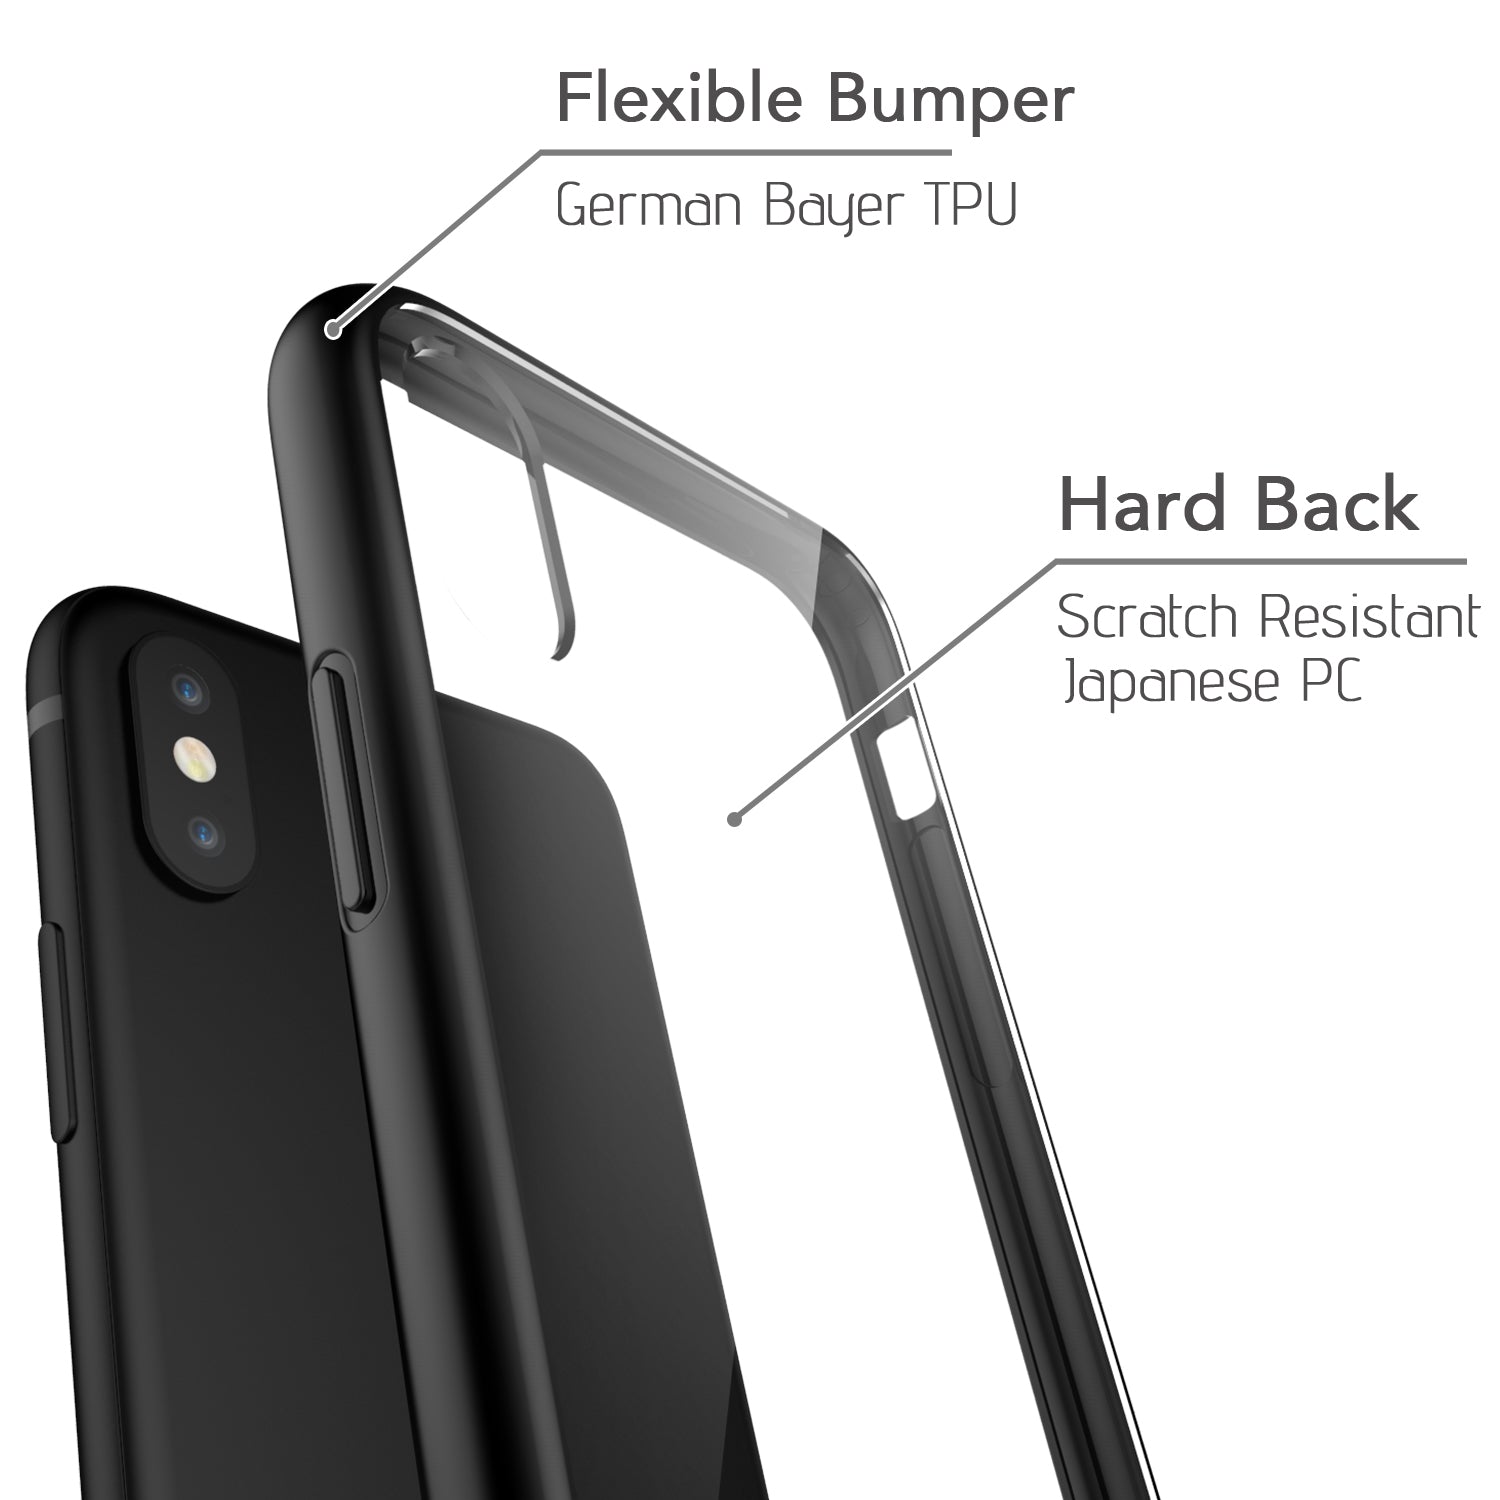 Luvvitt Clear View Hybrid Case for iPhone X / XS - Black